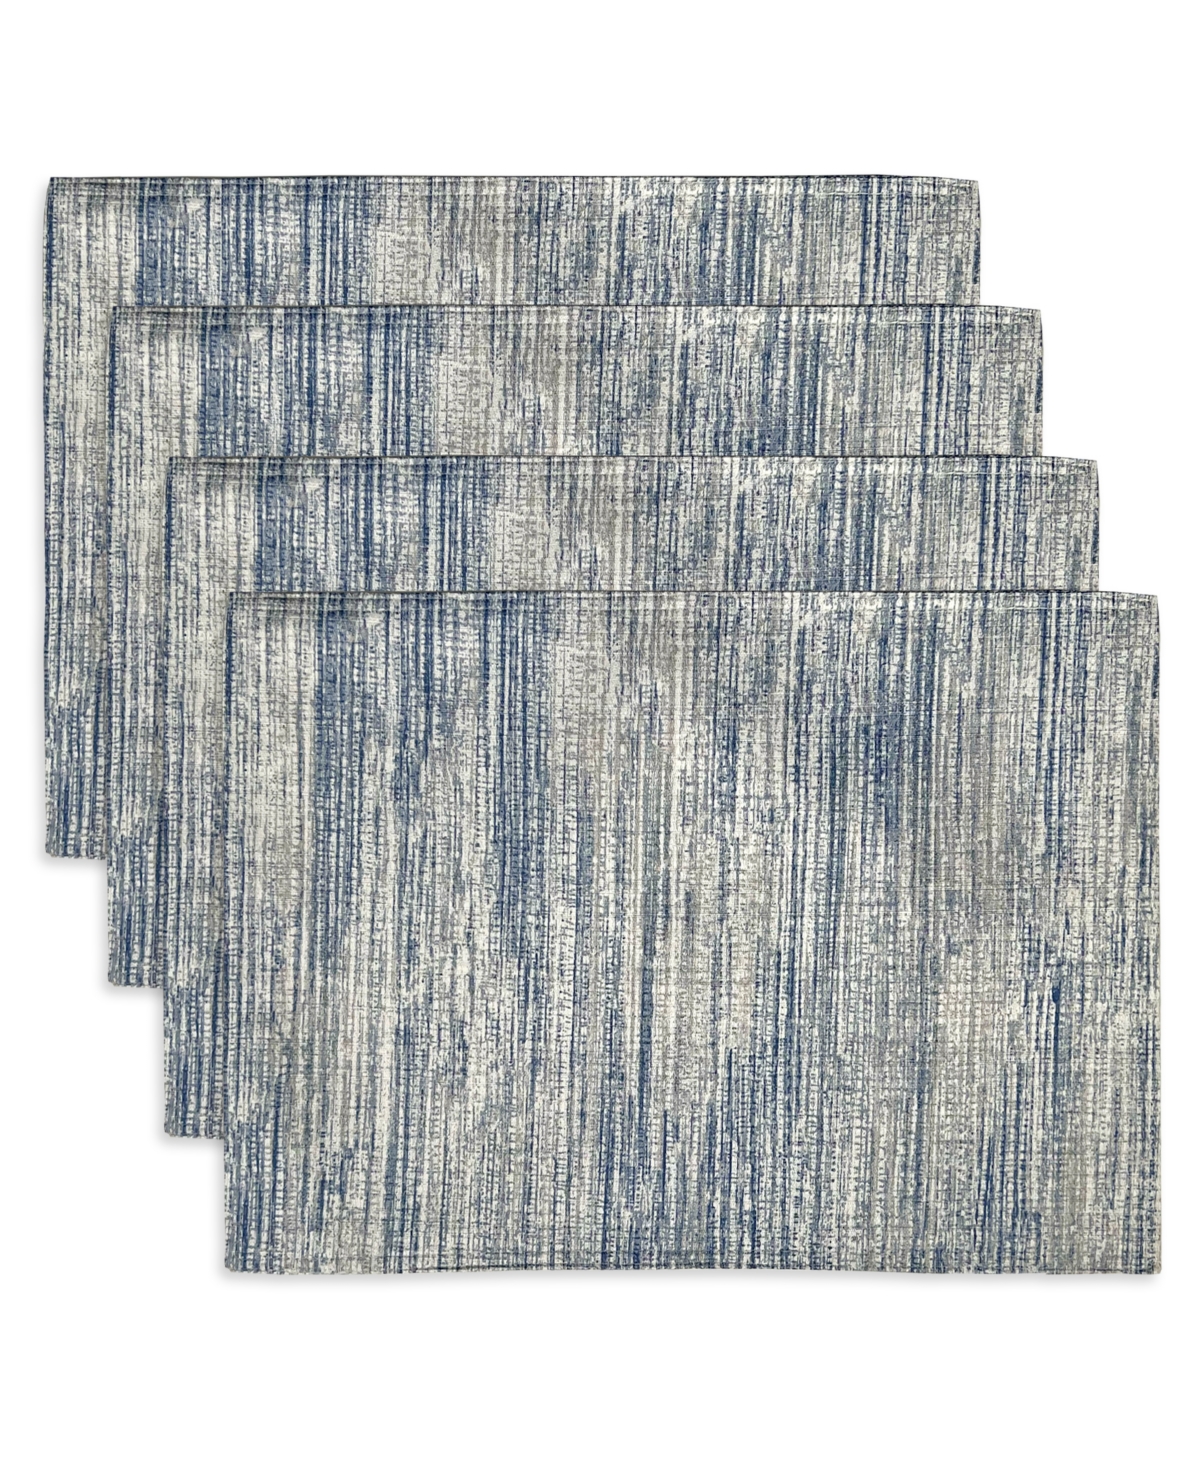 Noritake Colorwave Weave Placemats, 4 Pack In Blue